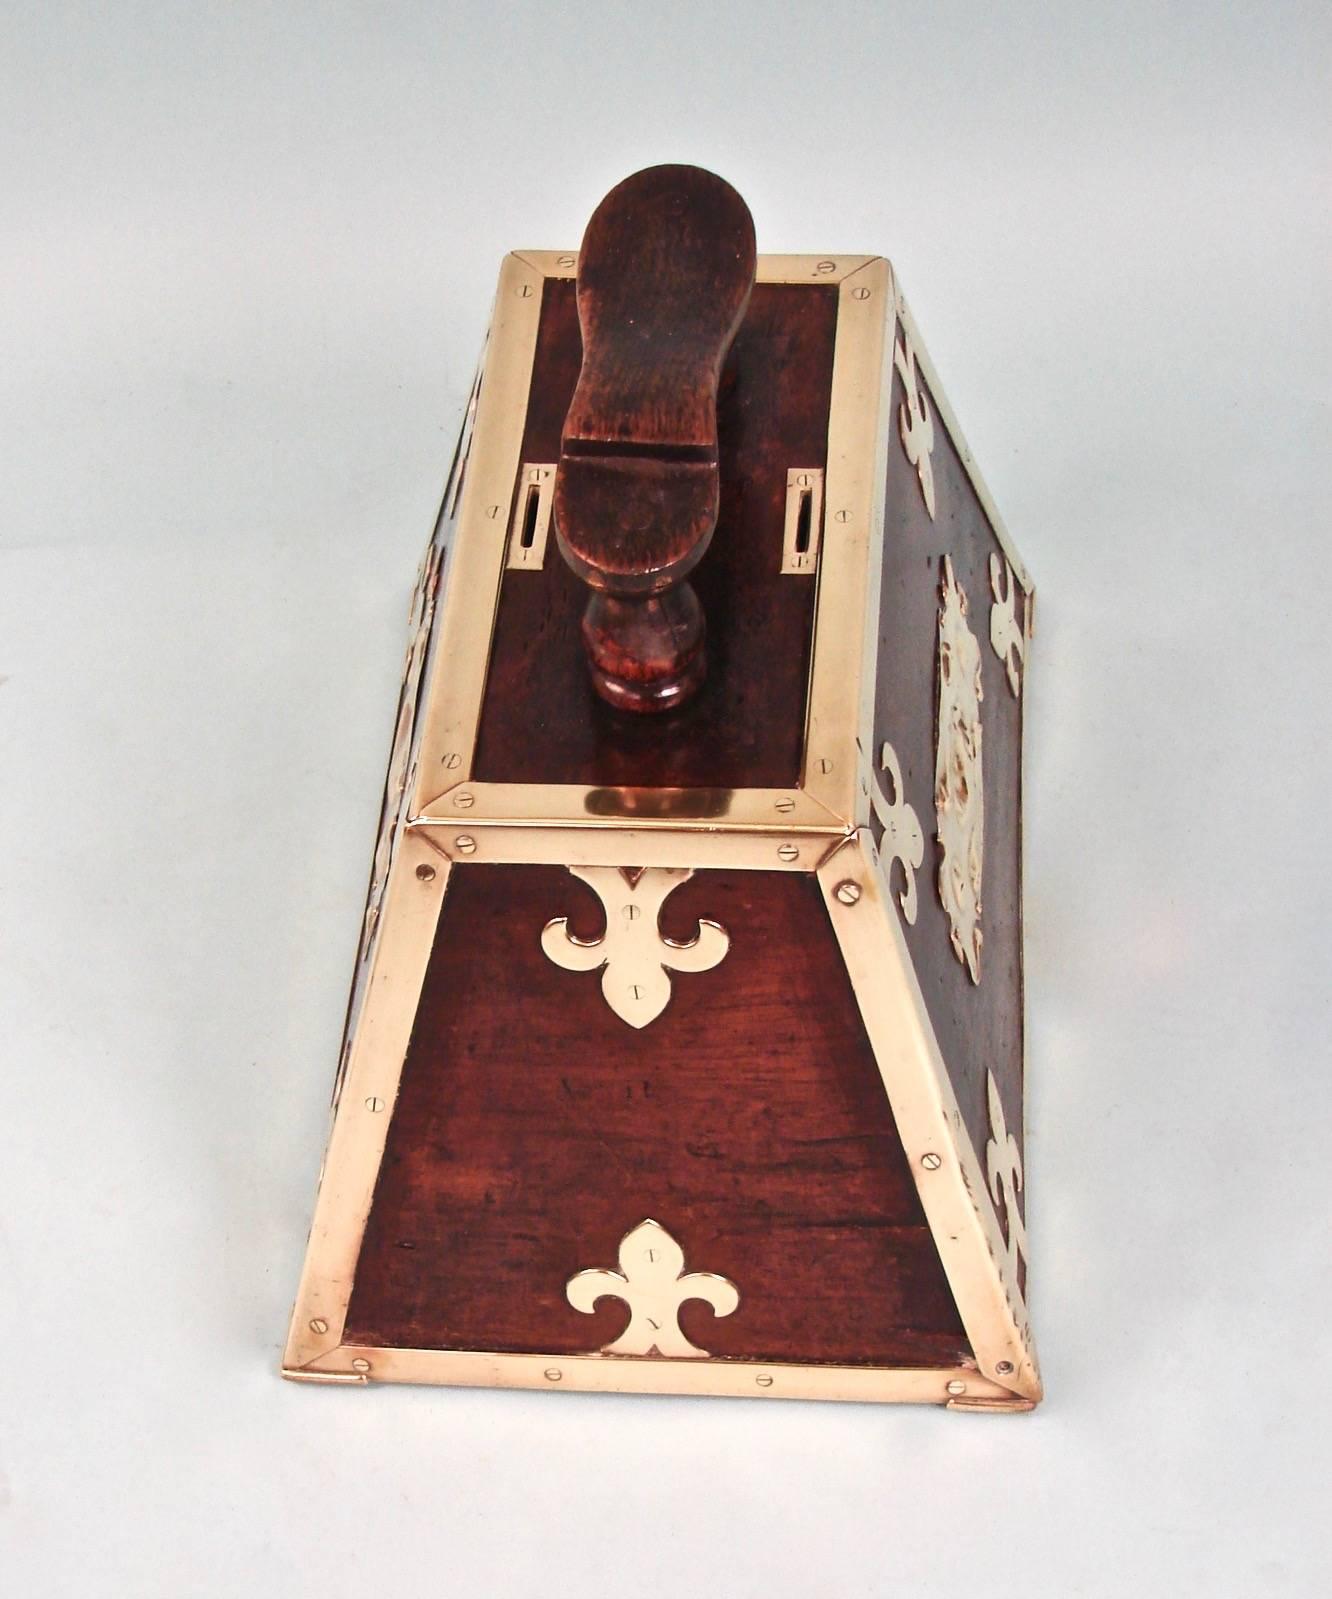 A wonderful Turkish brass-mounted mahogany Art Nouveau period shoe shine box of trapezoidal form. This is a fine example of a street vendor's original shoe shine kit with top mounted coin slots and a locking door.